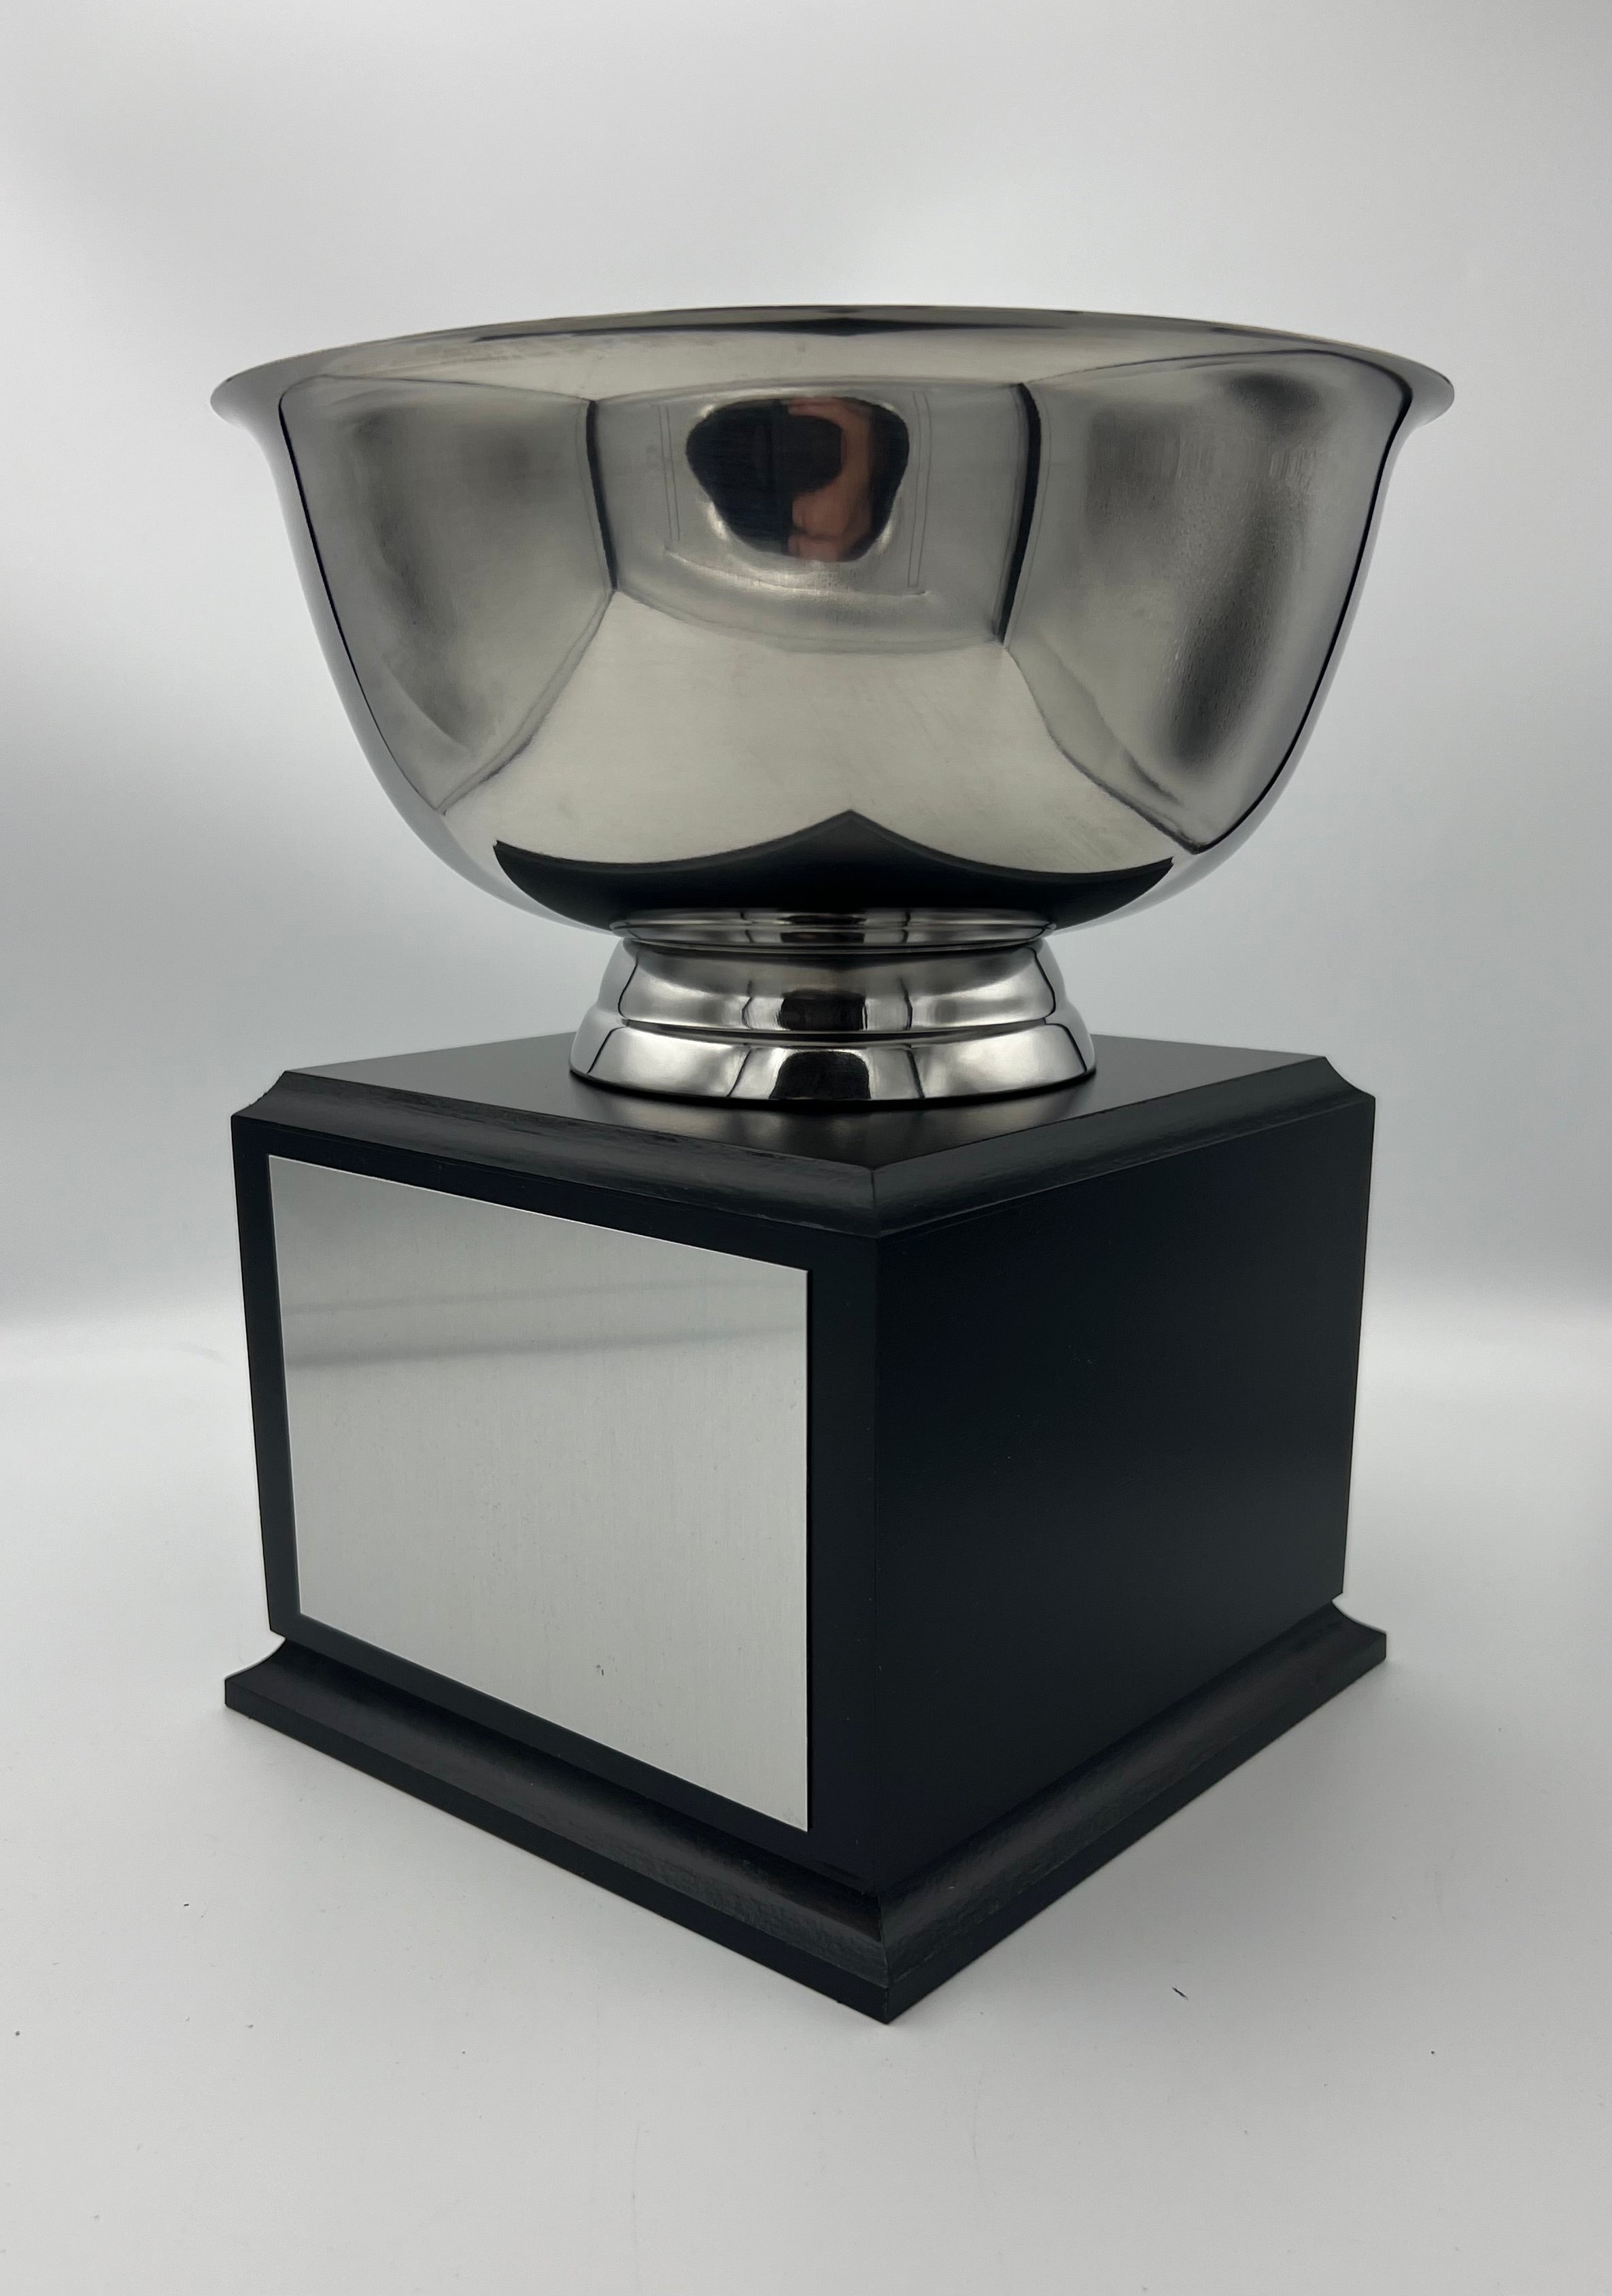 Bright nickel plated metal bowl mounted on a black wood base